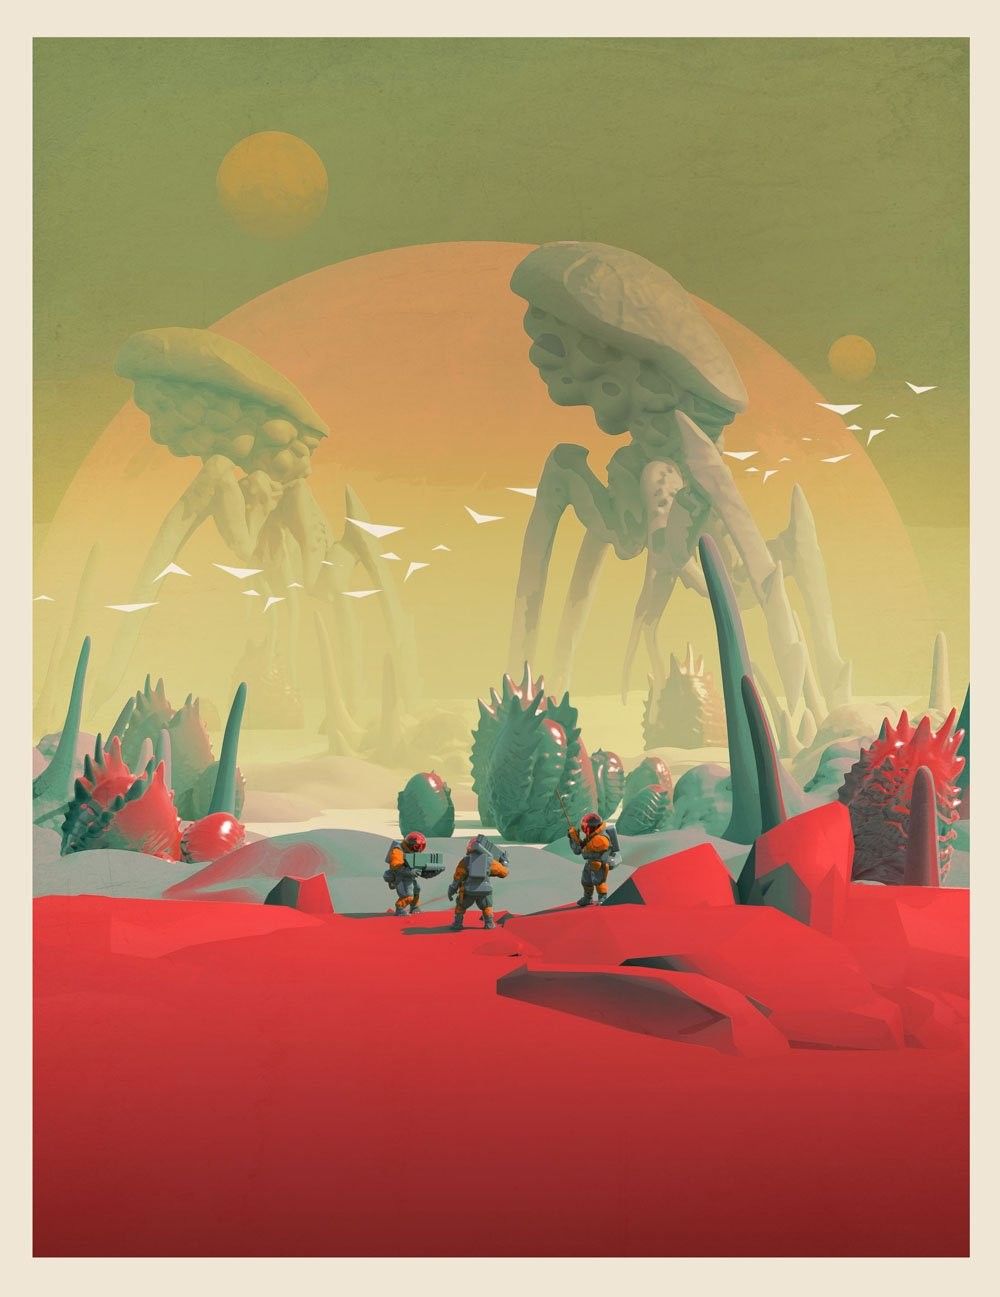 A digital painting of a group of characters standing in a red alien landscape - Low poly